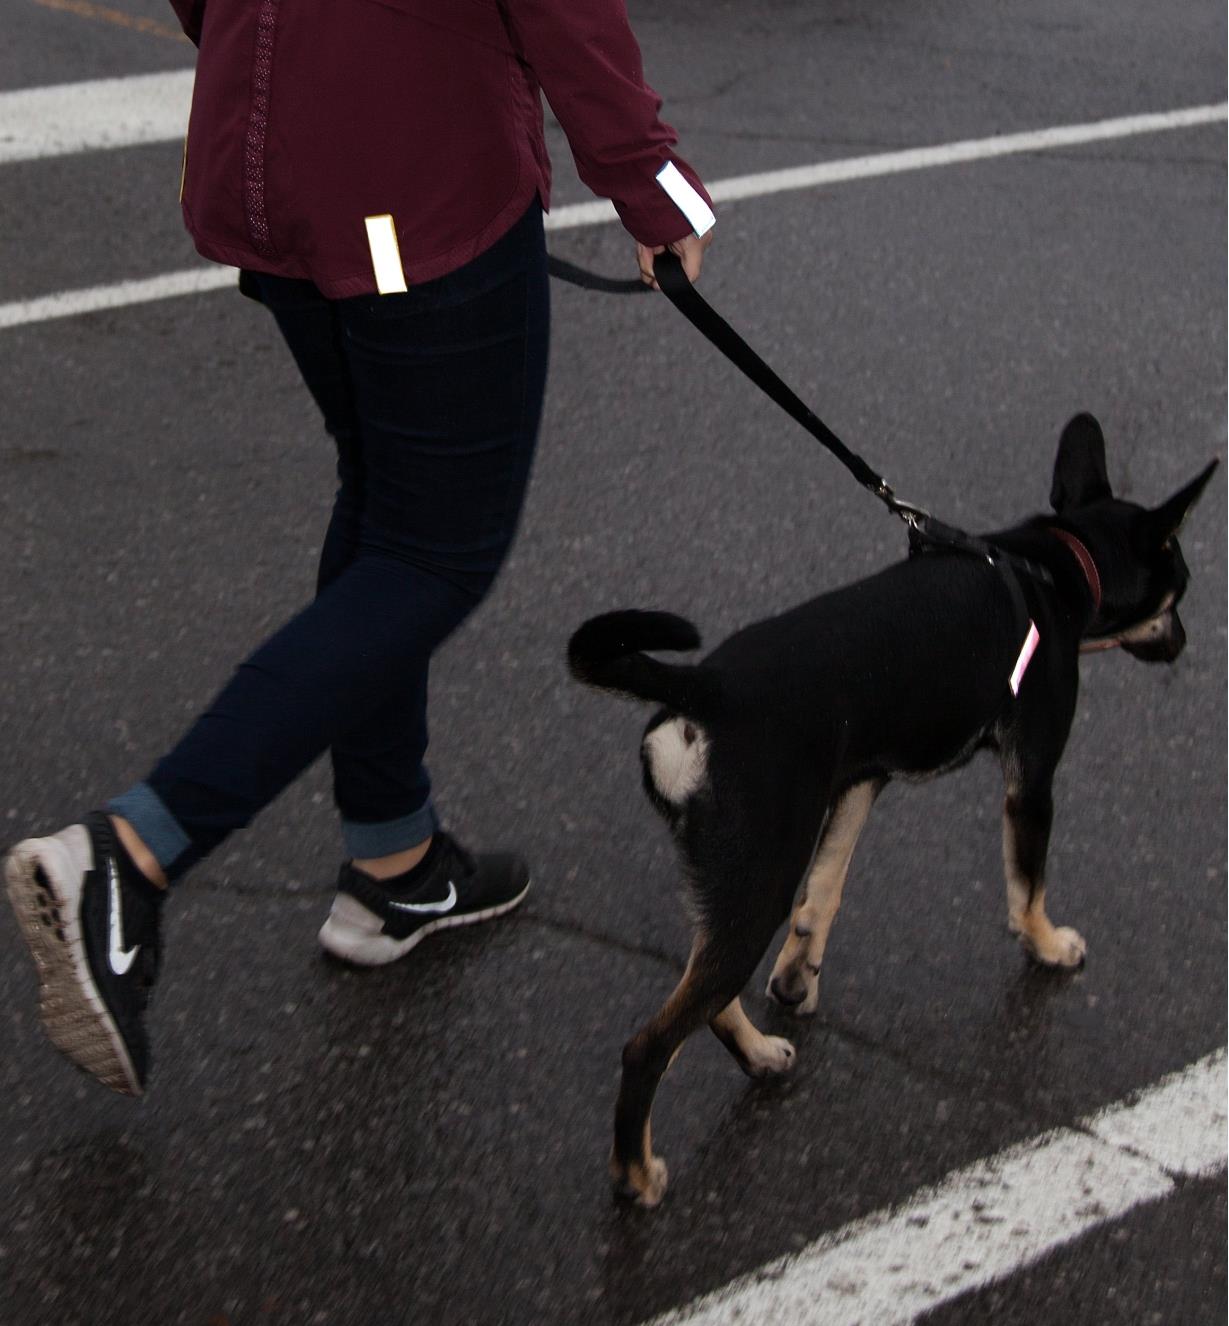 Reflector Strips attached to a jacket sleeve and back as well as a dog's collar